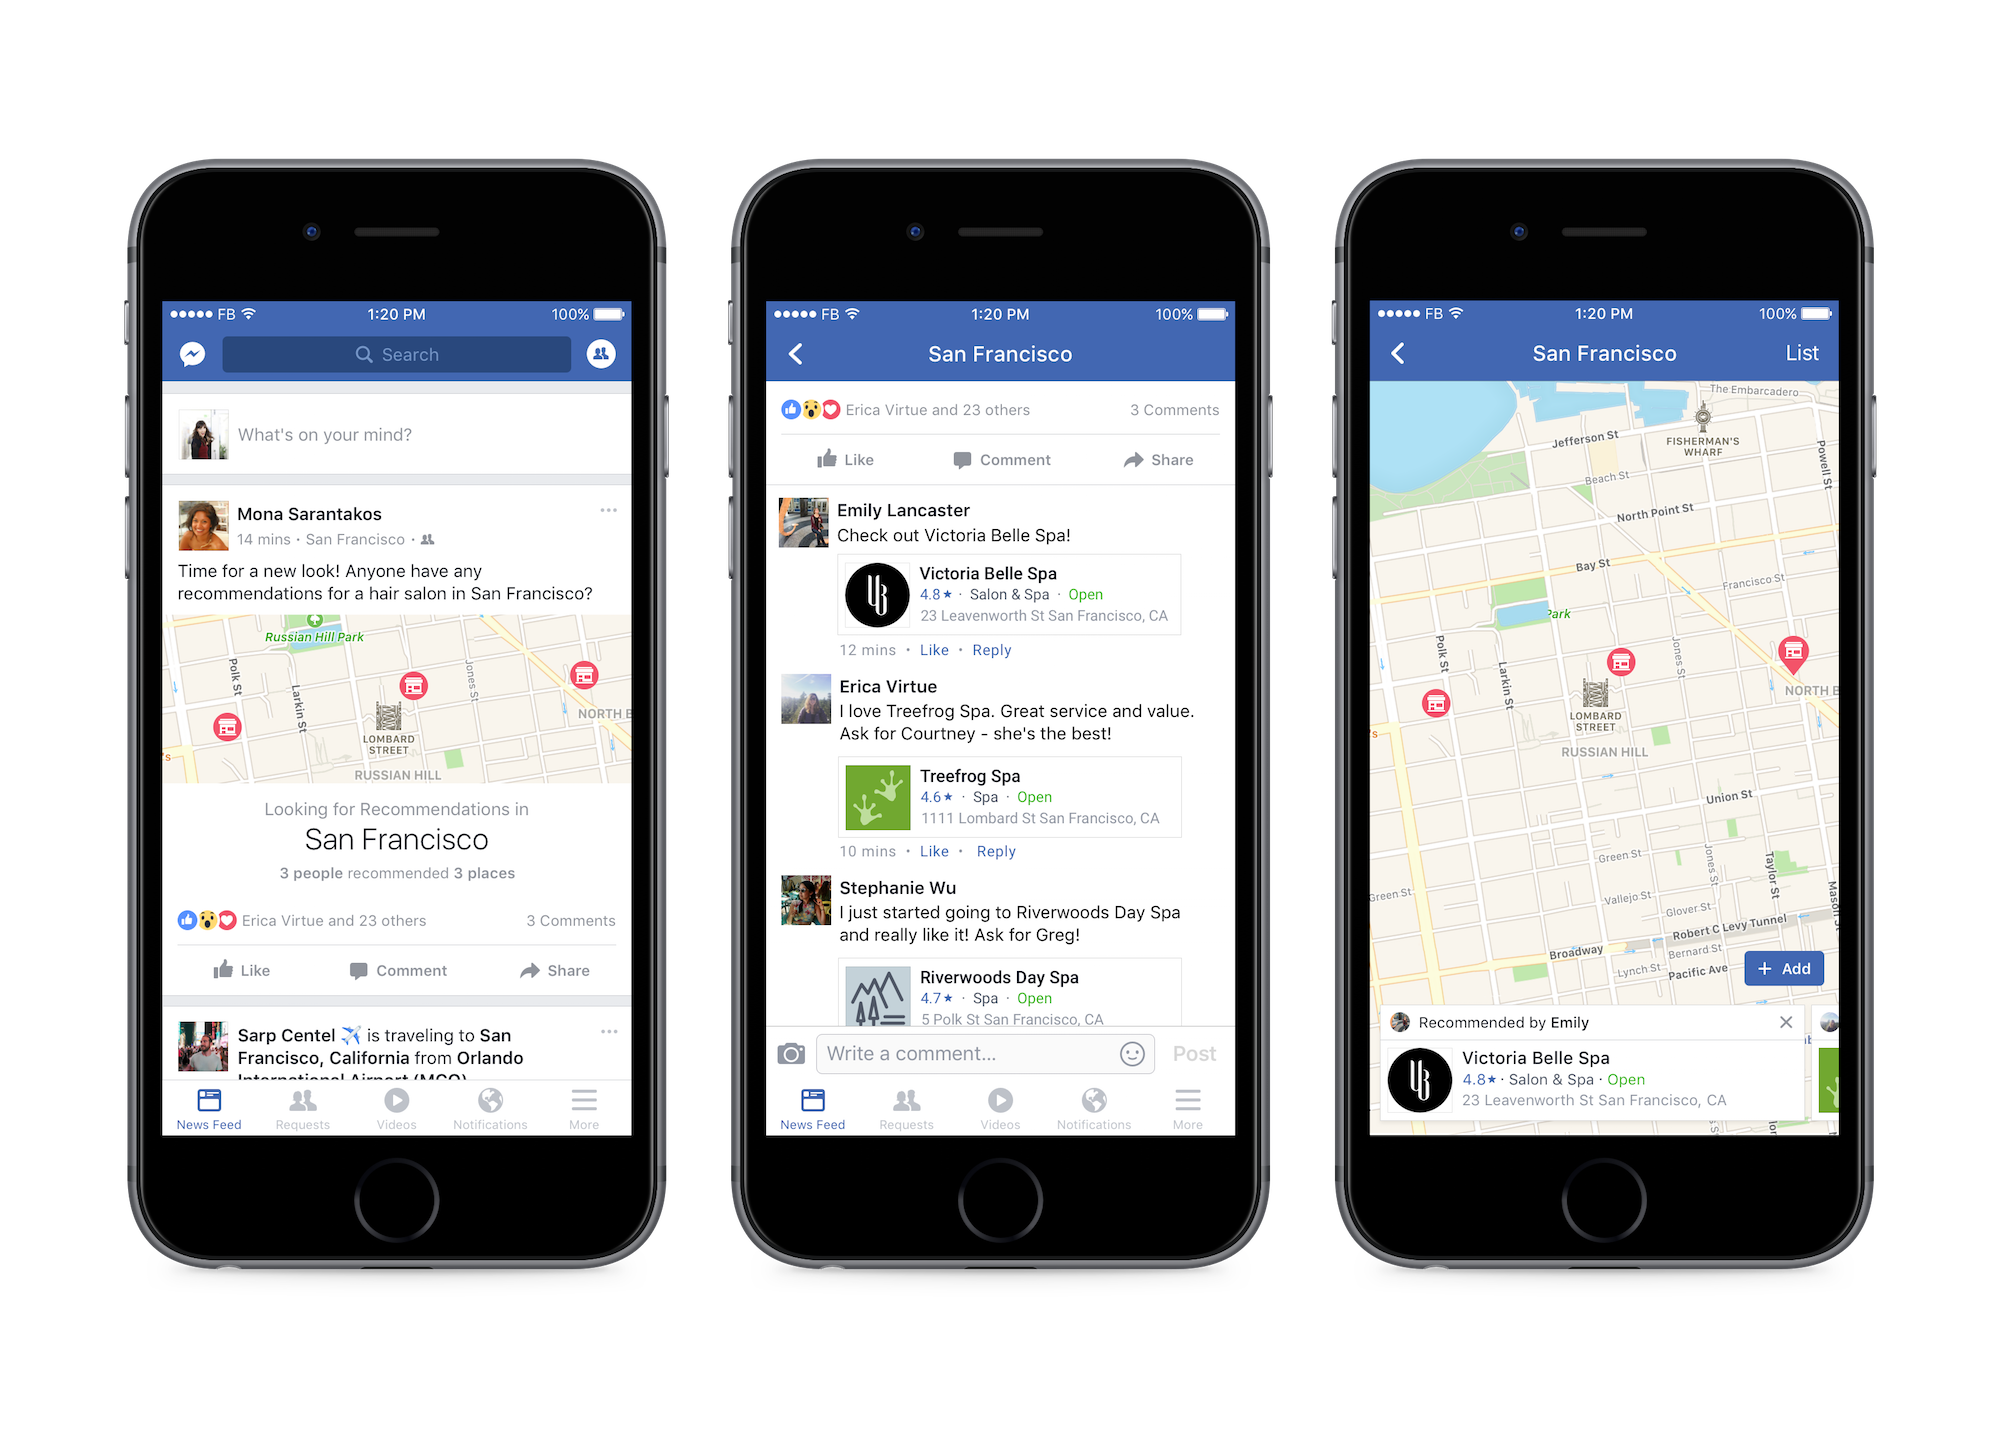 Facebook wants to be your social secretary and concierge